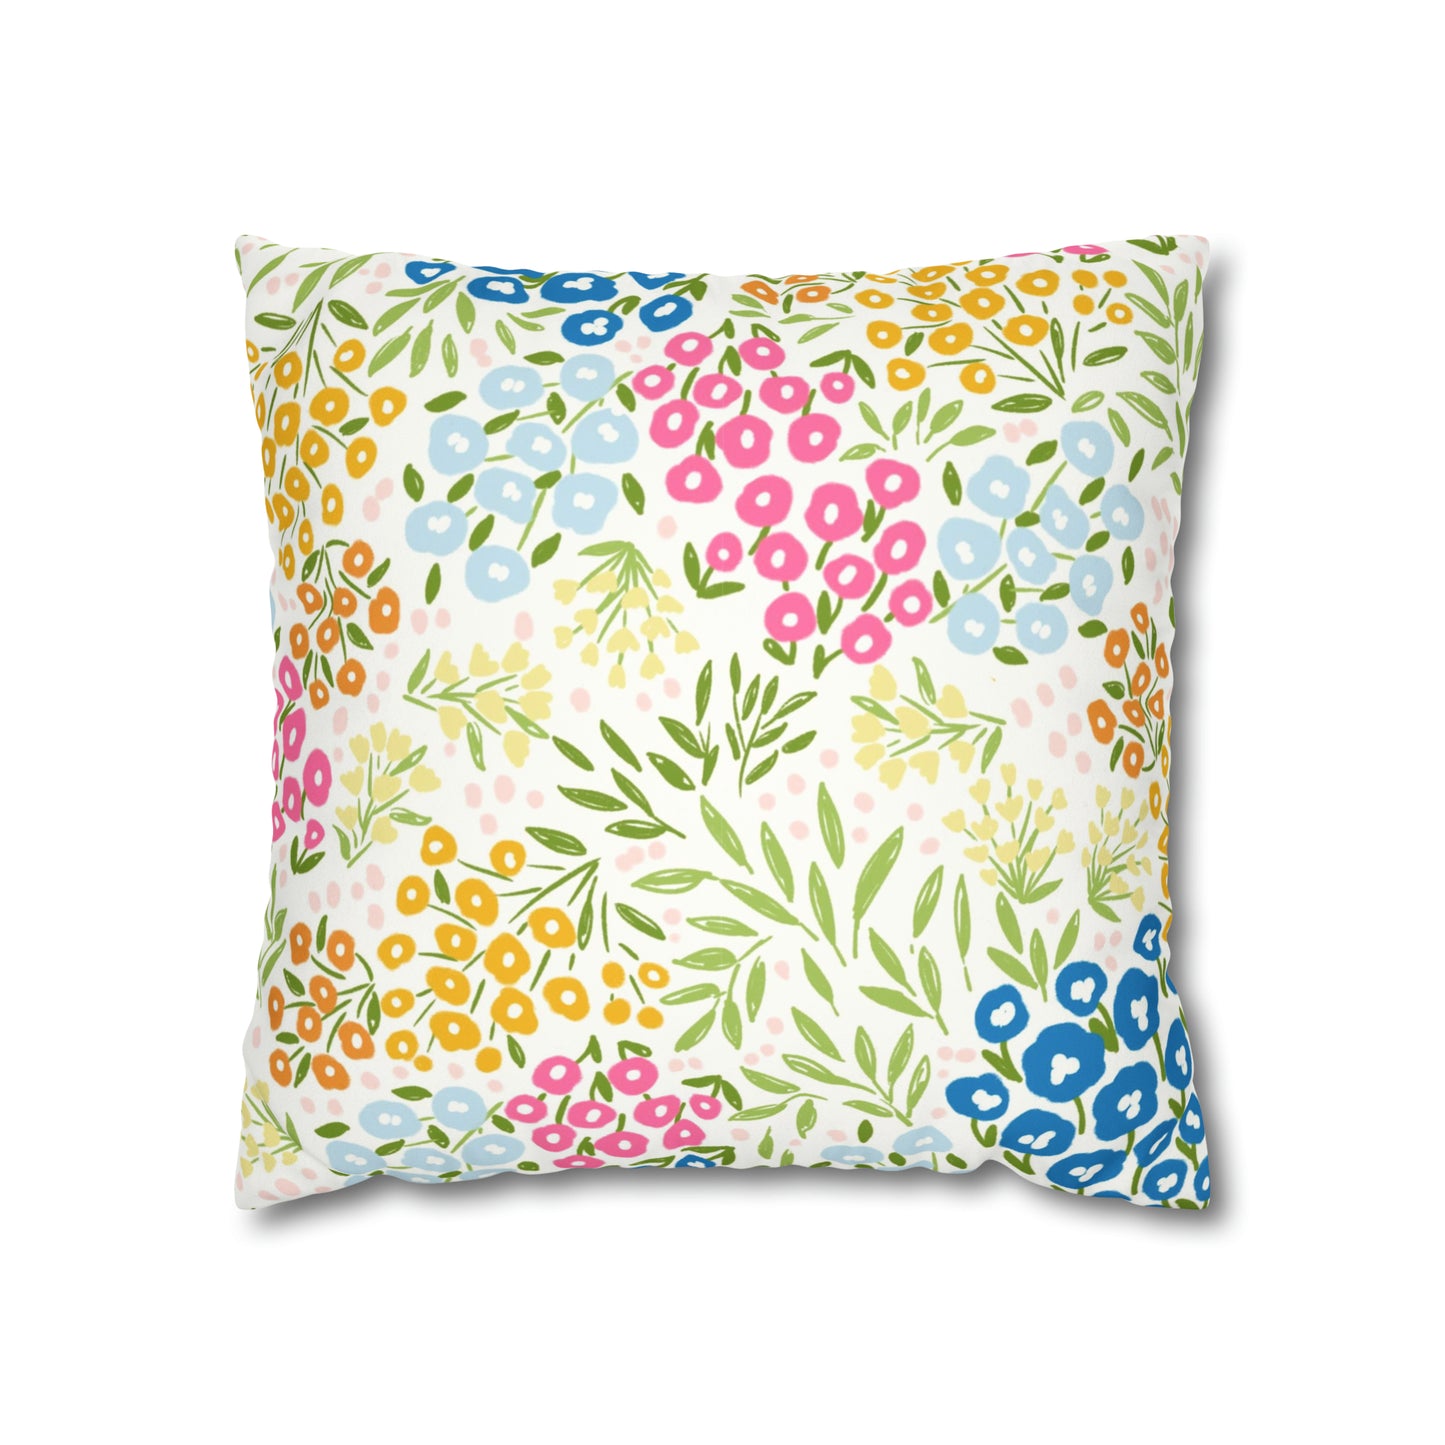 Summer Wildflower Faux Suede Square Pillow Case Cover | Nature Inspired Home Decor | Pillow Not Included